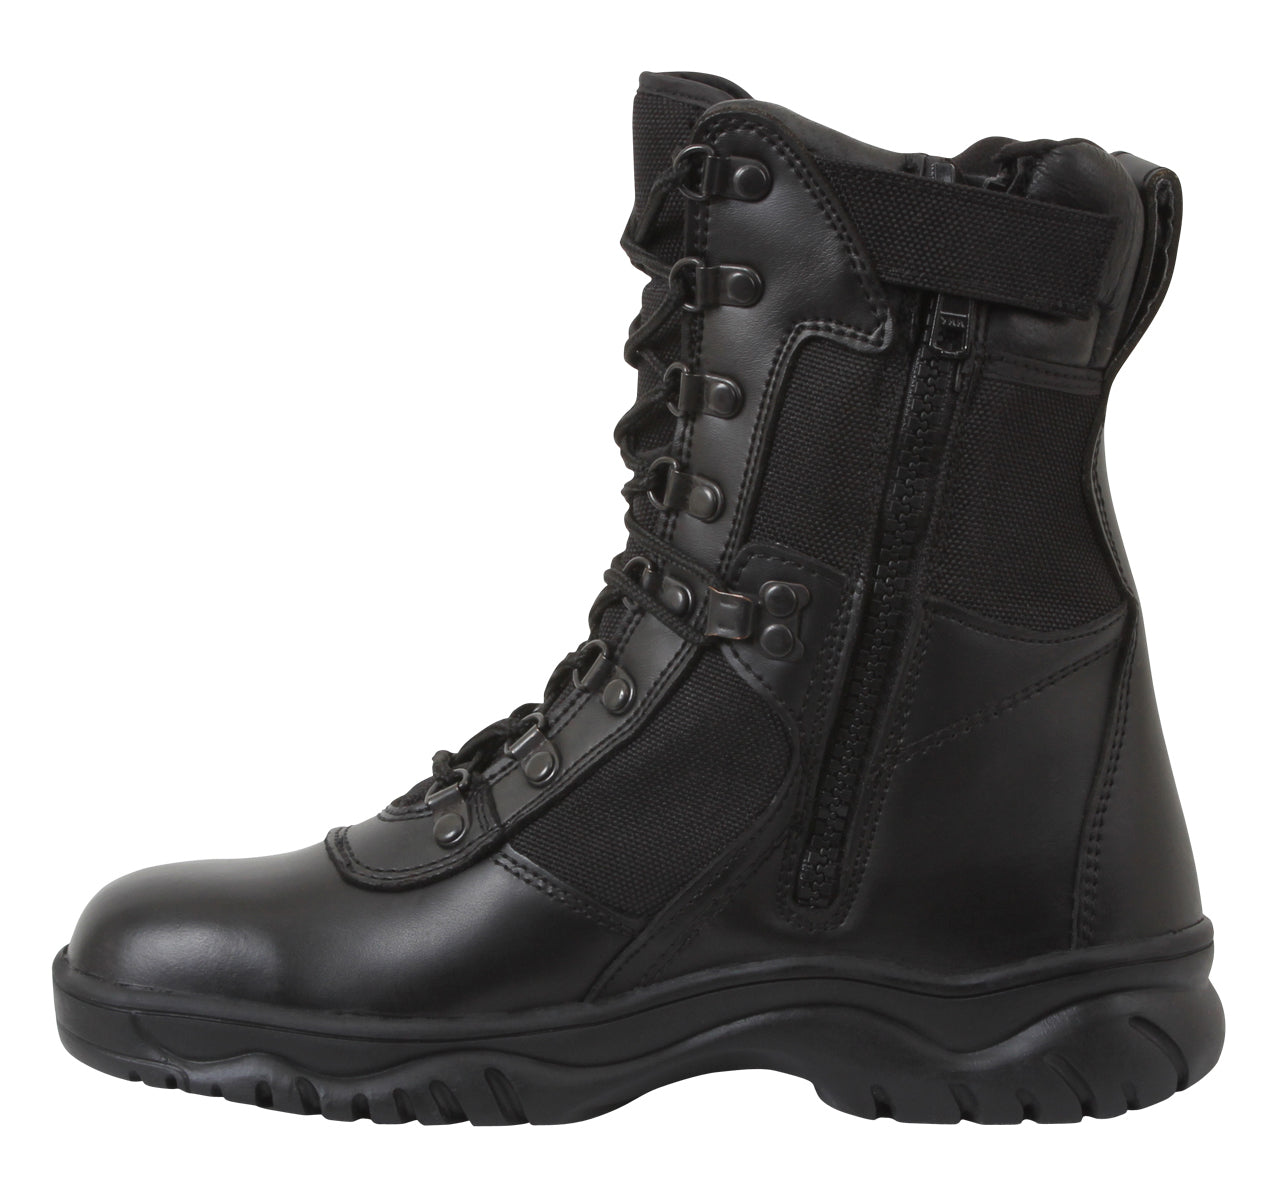 Forced Entry 8" Black Tactical Boot W/ Side Zipper - SWAT Boots